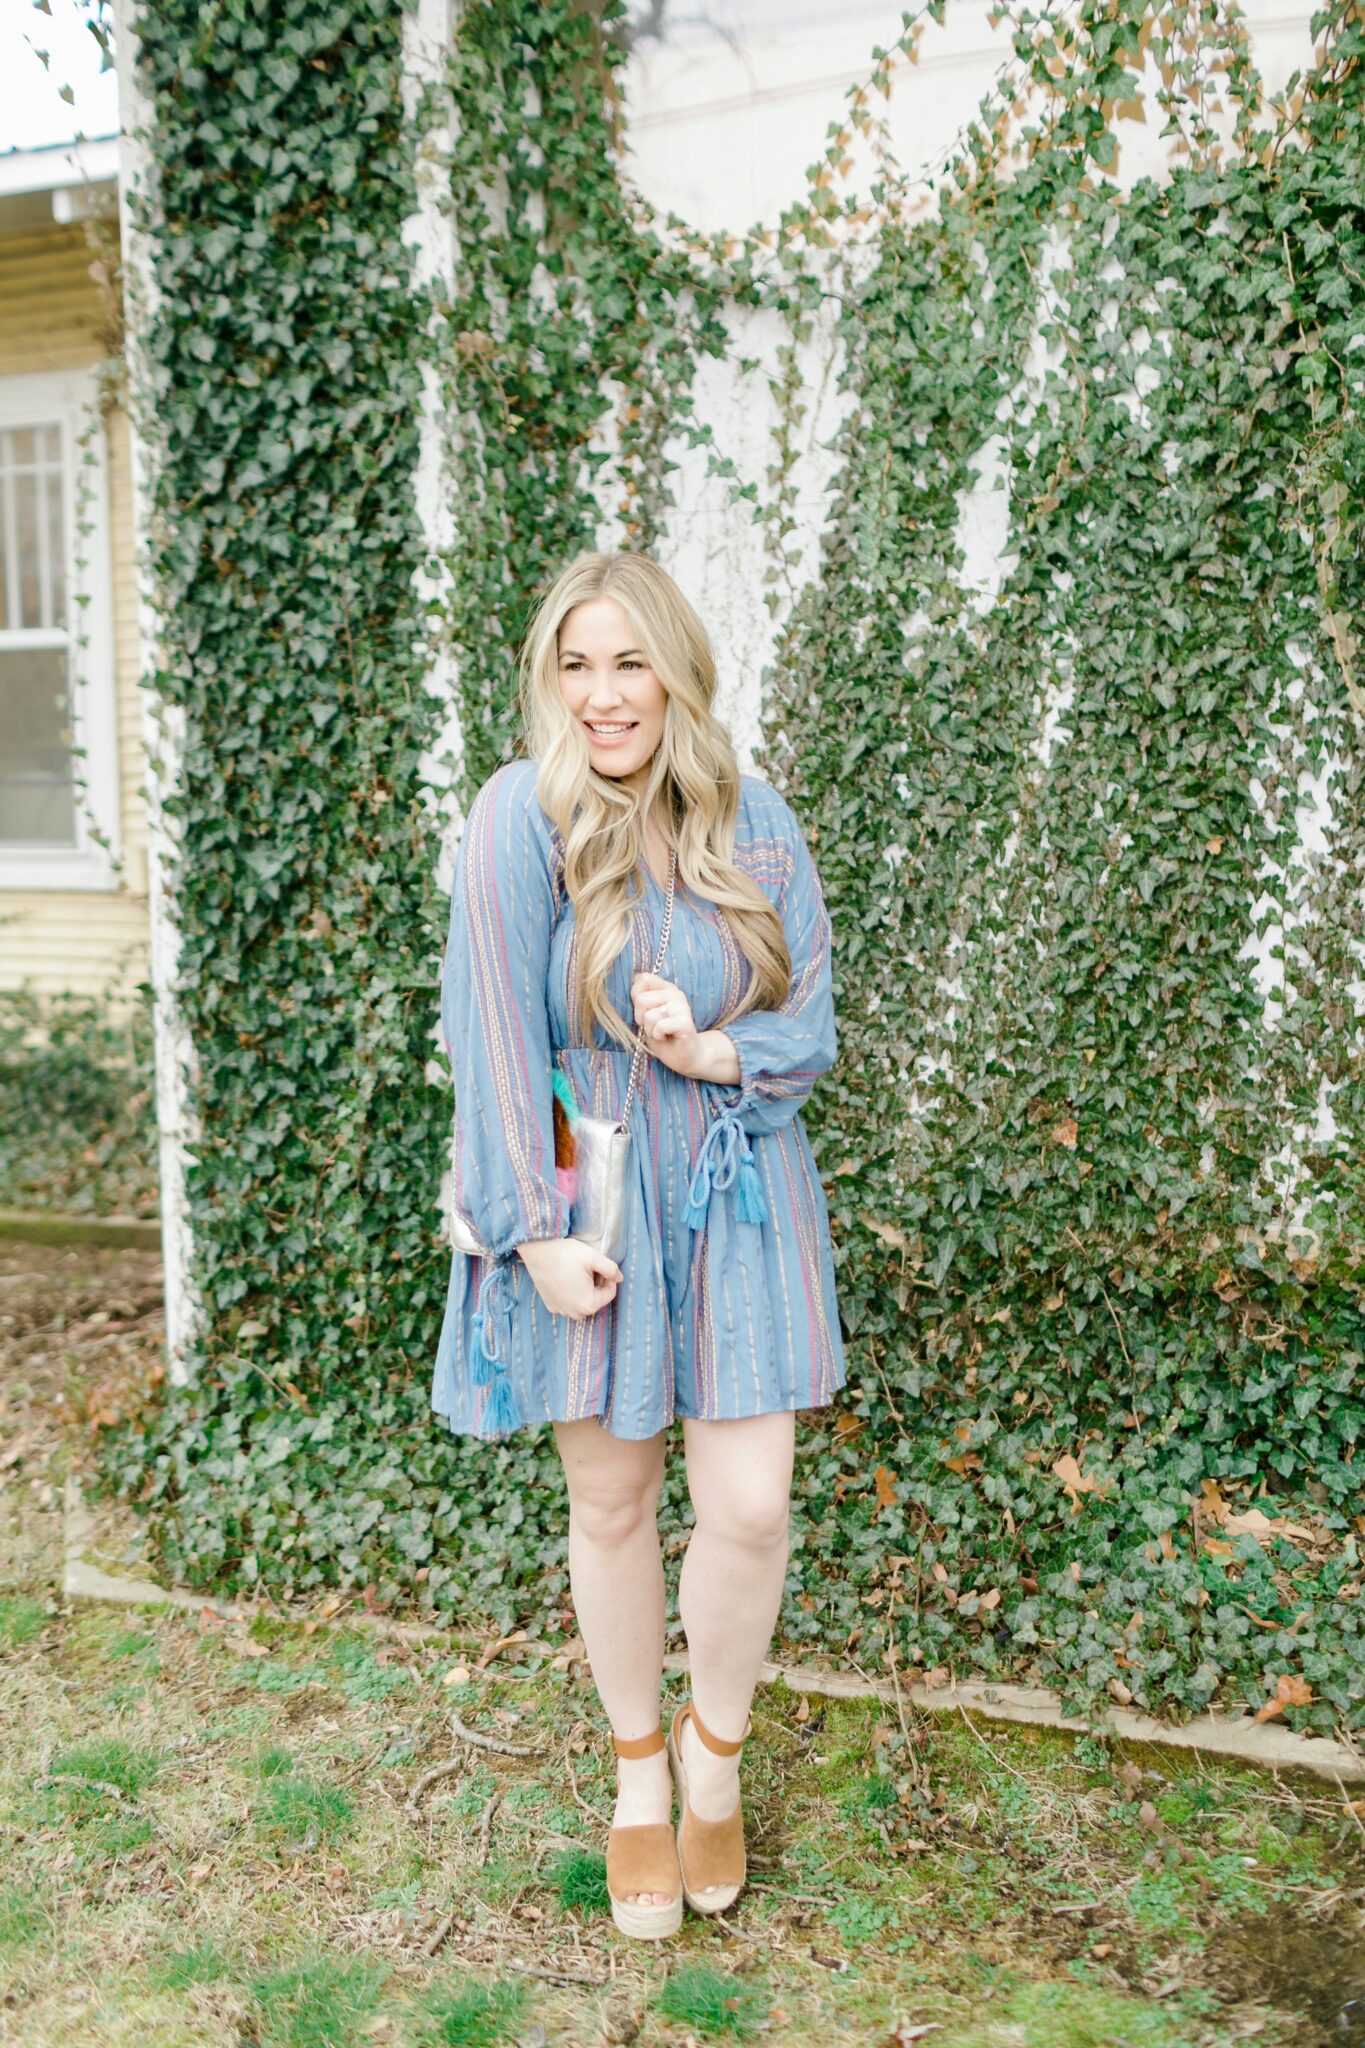 Cute spring dresses featured by top Memphis fashion blogger, Walking in Memphis in High Heels: image of a woman wearing an ASOS denim striped dress